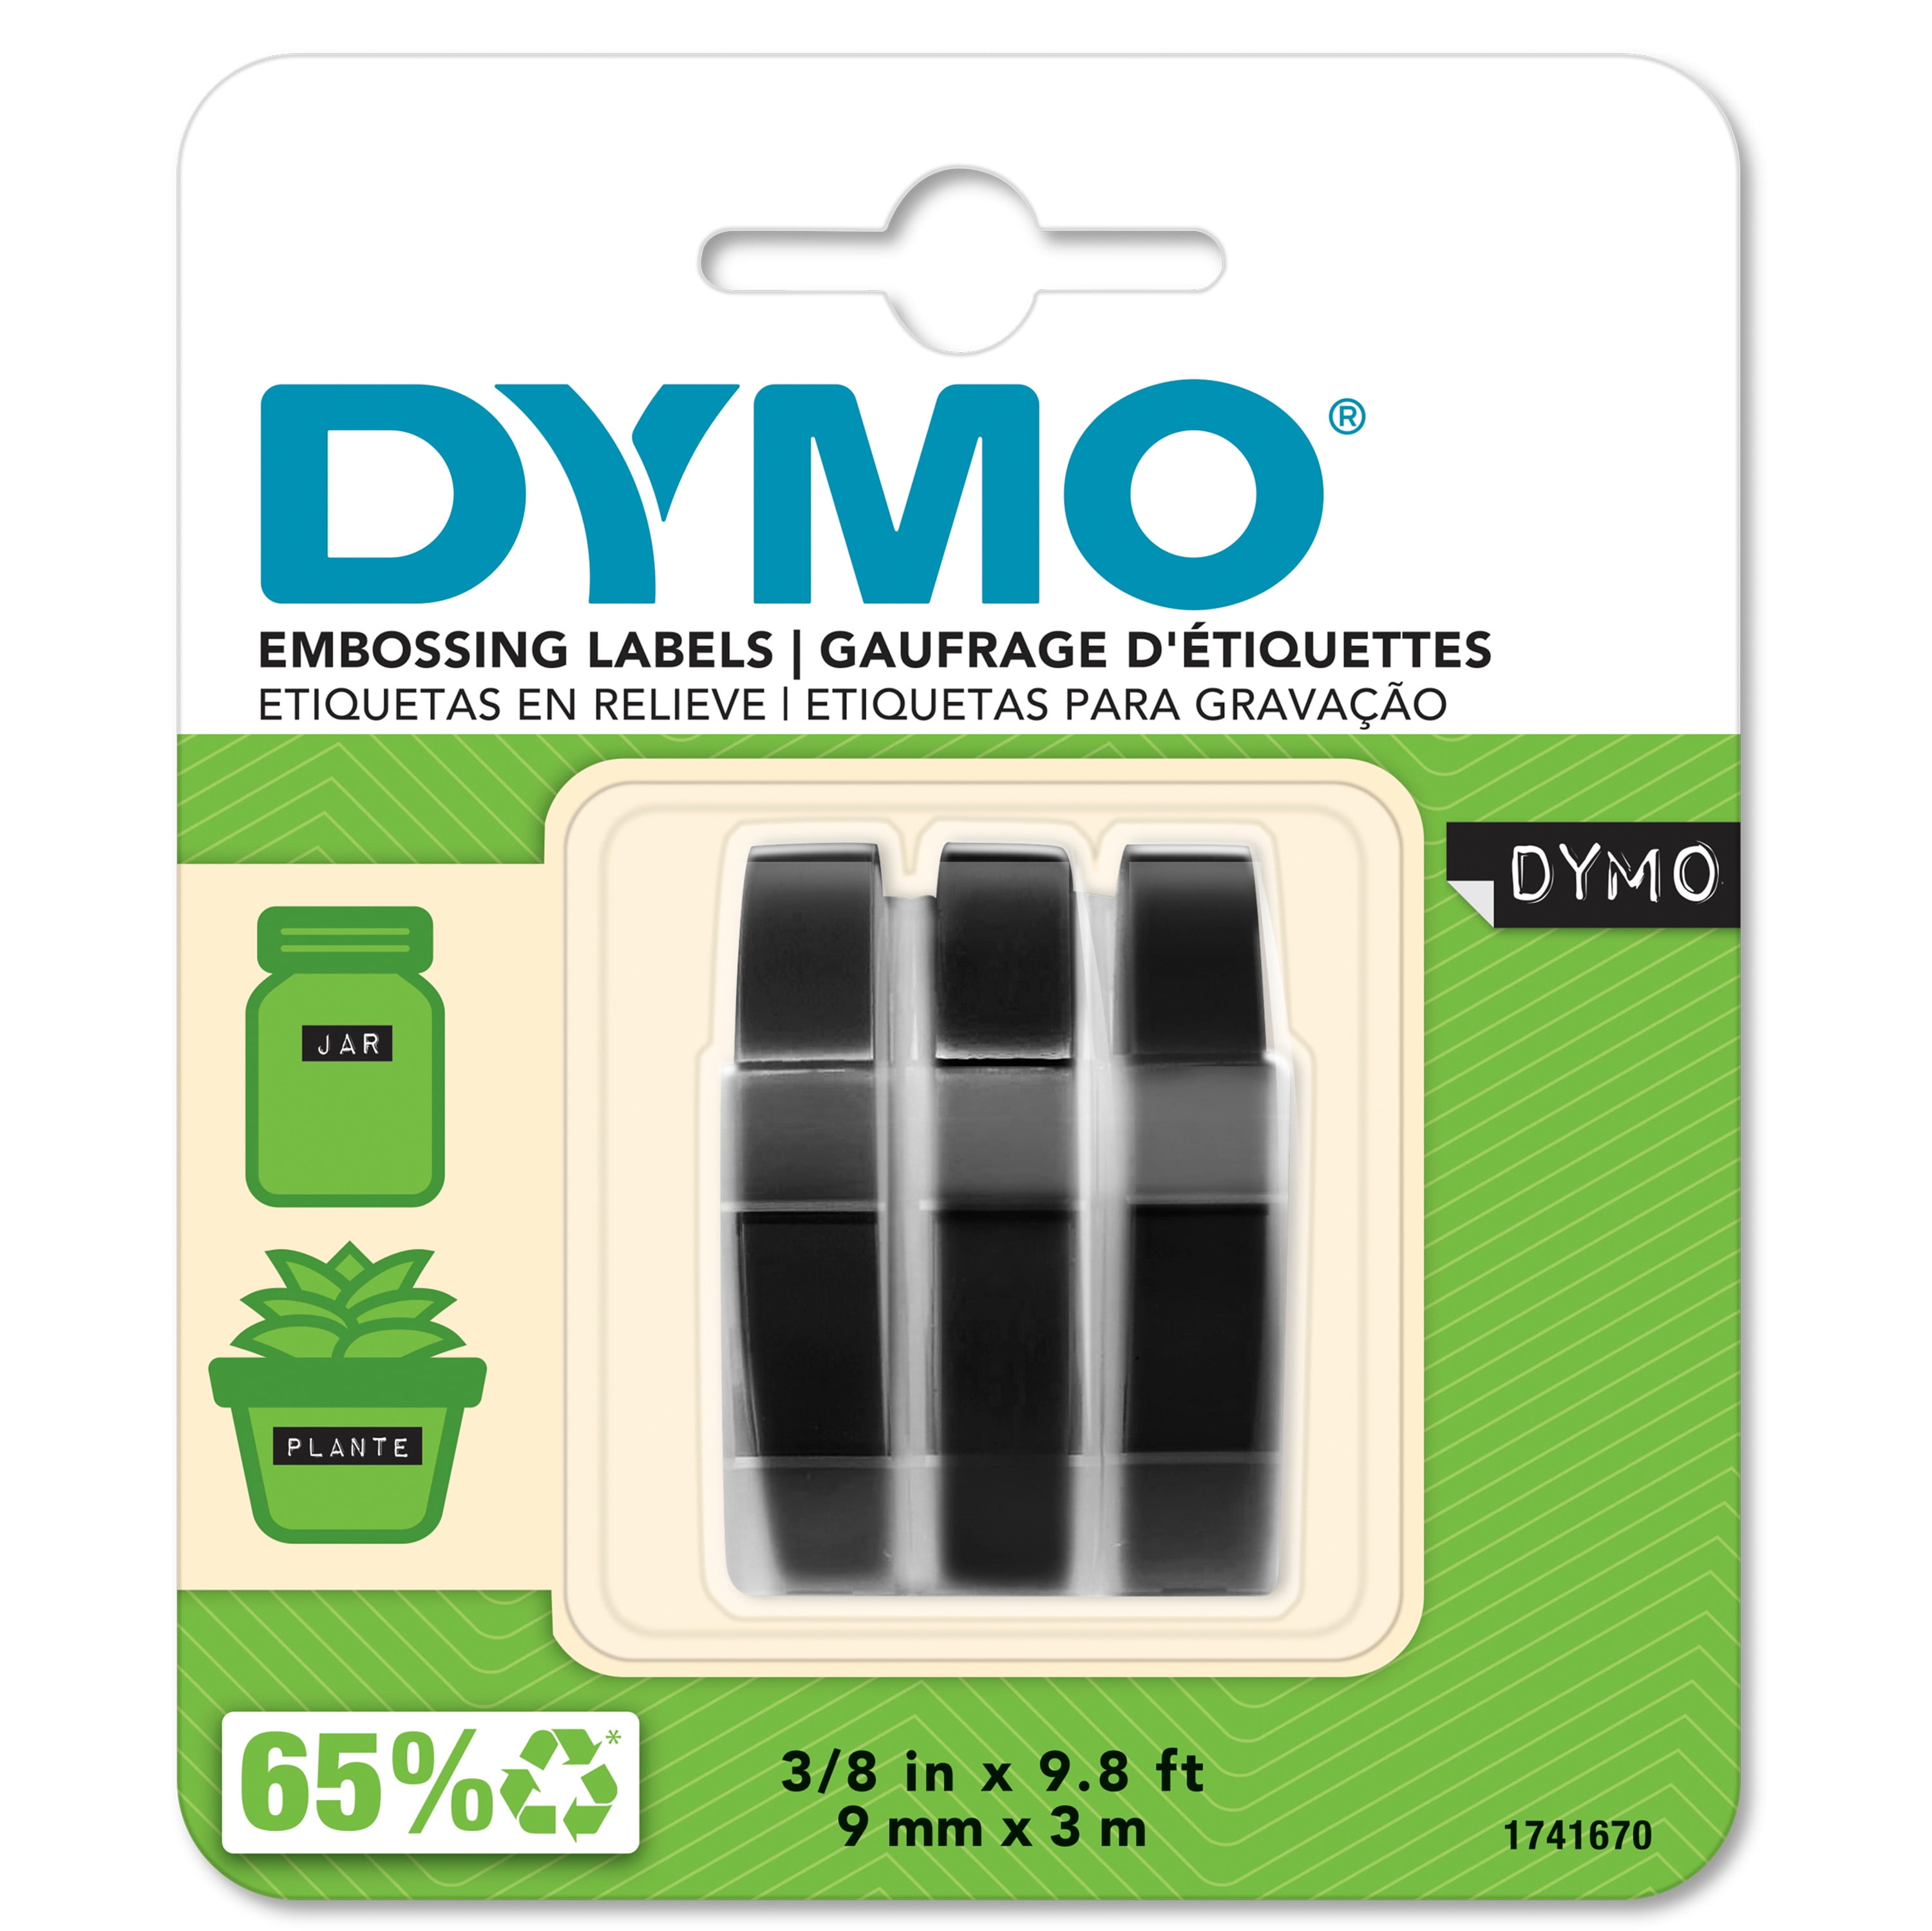 Dymo Lot of 9 Vintage Dymo Labeling Label Tape 1/4” assorted colors used 